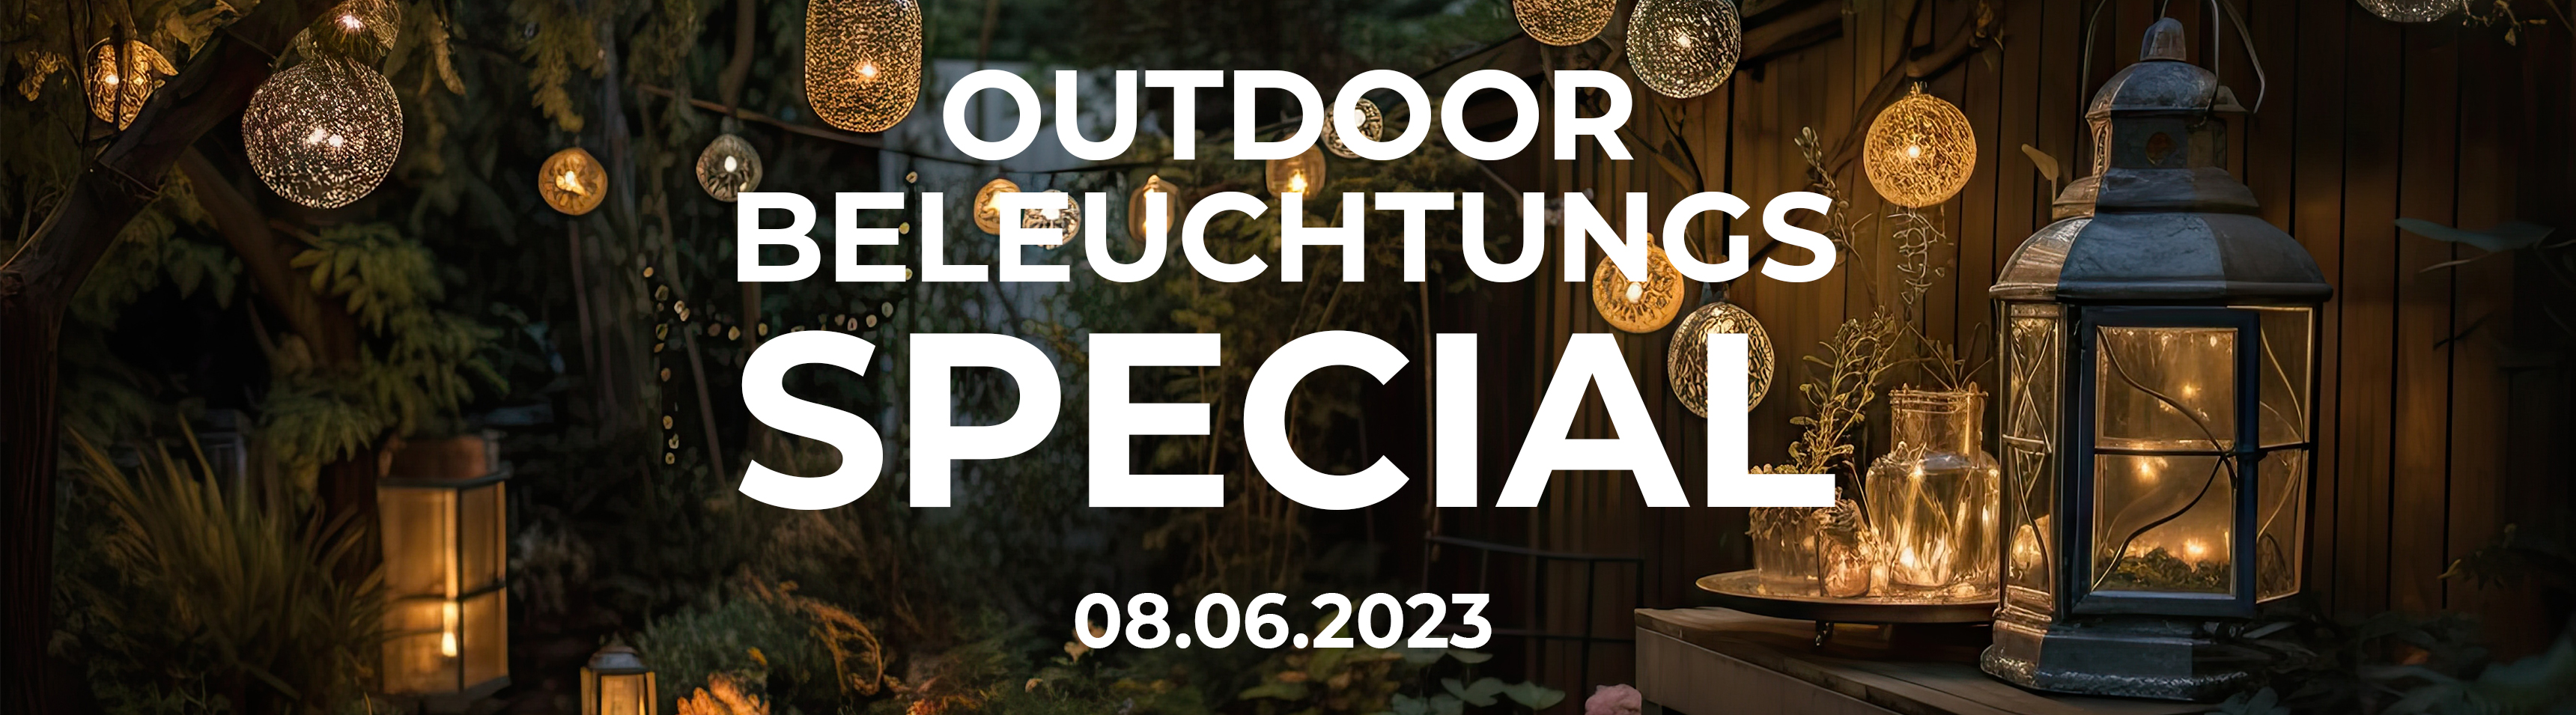 Outdoor-Beleuchtungs-Special